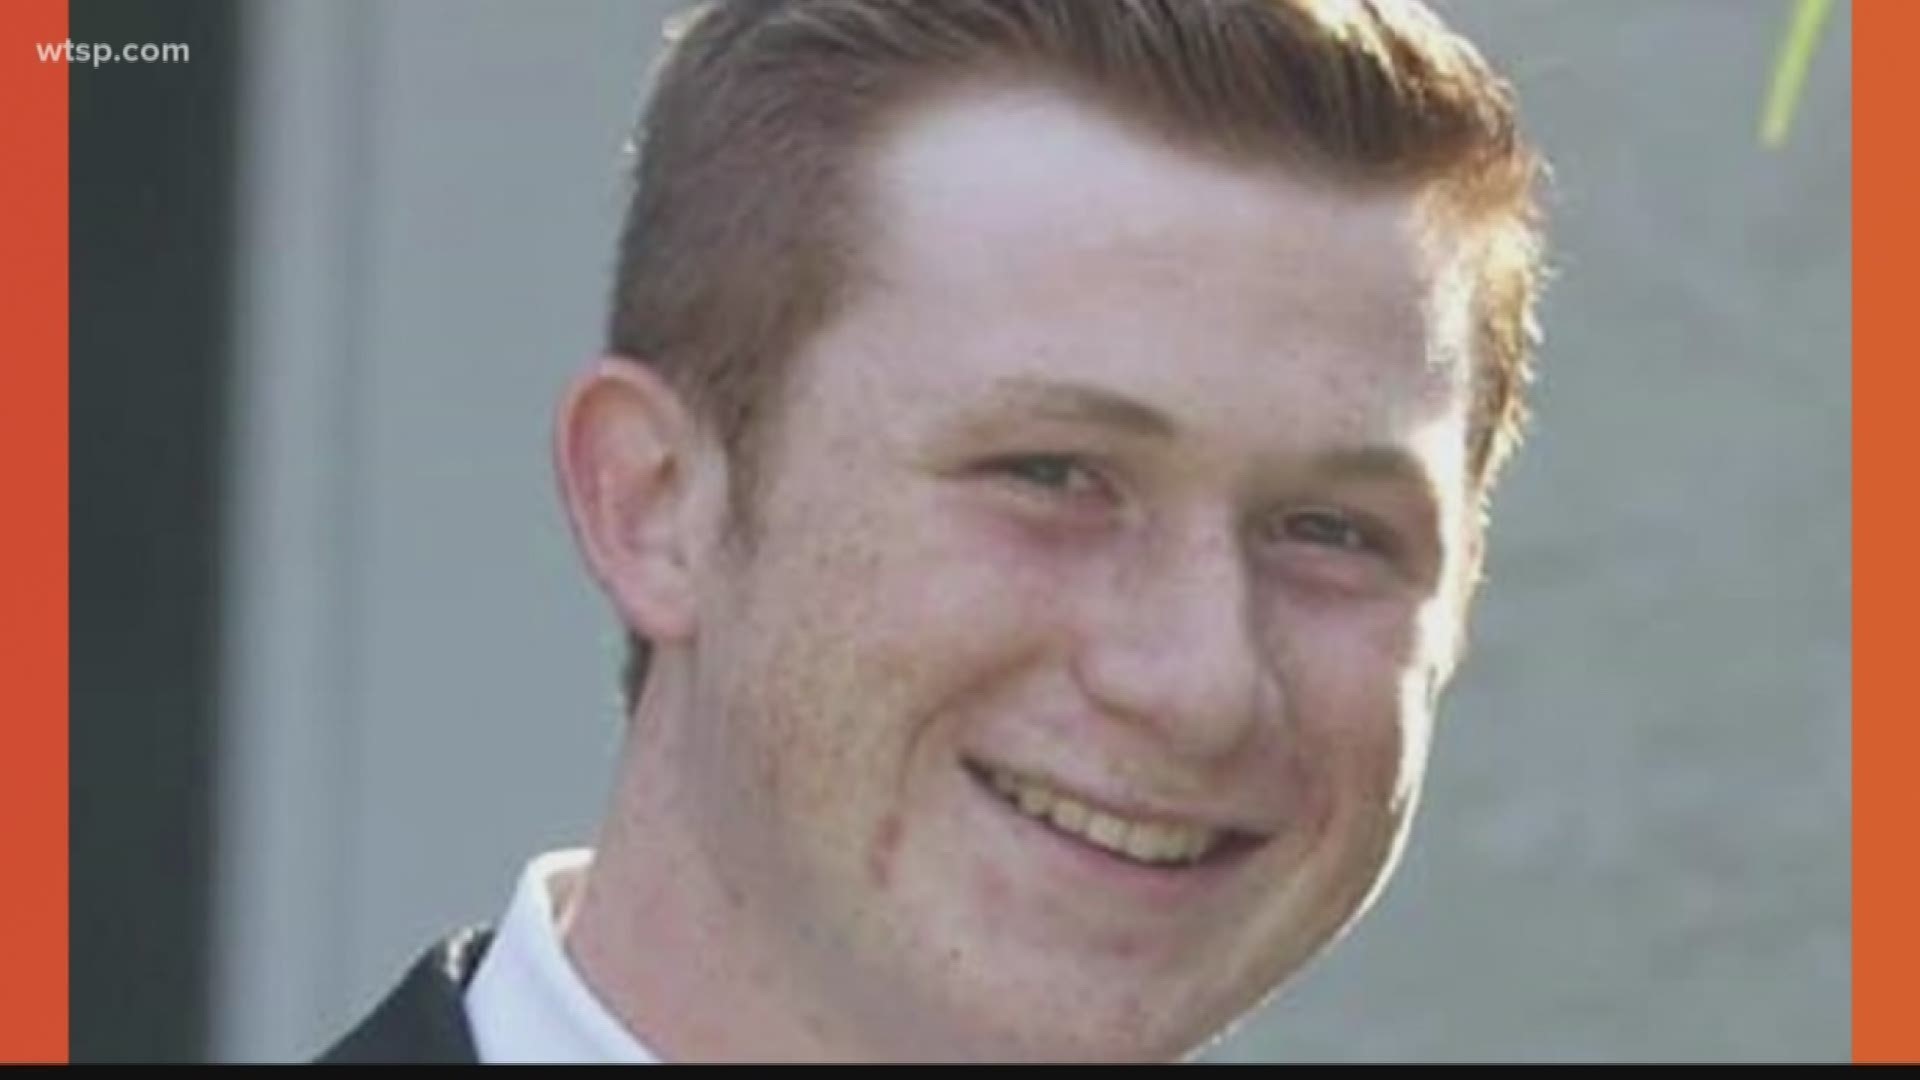 A 22-year-old man who graduated from Cardinal Mooney Catholic High School in Sarasota died after he fell while running from one roof to another.

Gage Schrantz, 22, who had been living in Tempe, Arizona, had a running start when he jumped from the roof of a bar to a record store, according to WTVF-TV. The separation between the two buildings is about 14 feet.

He fell some 50 feet to the pavement.